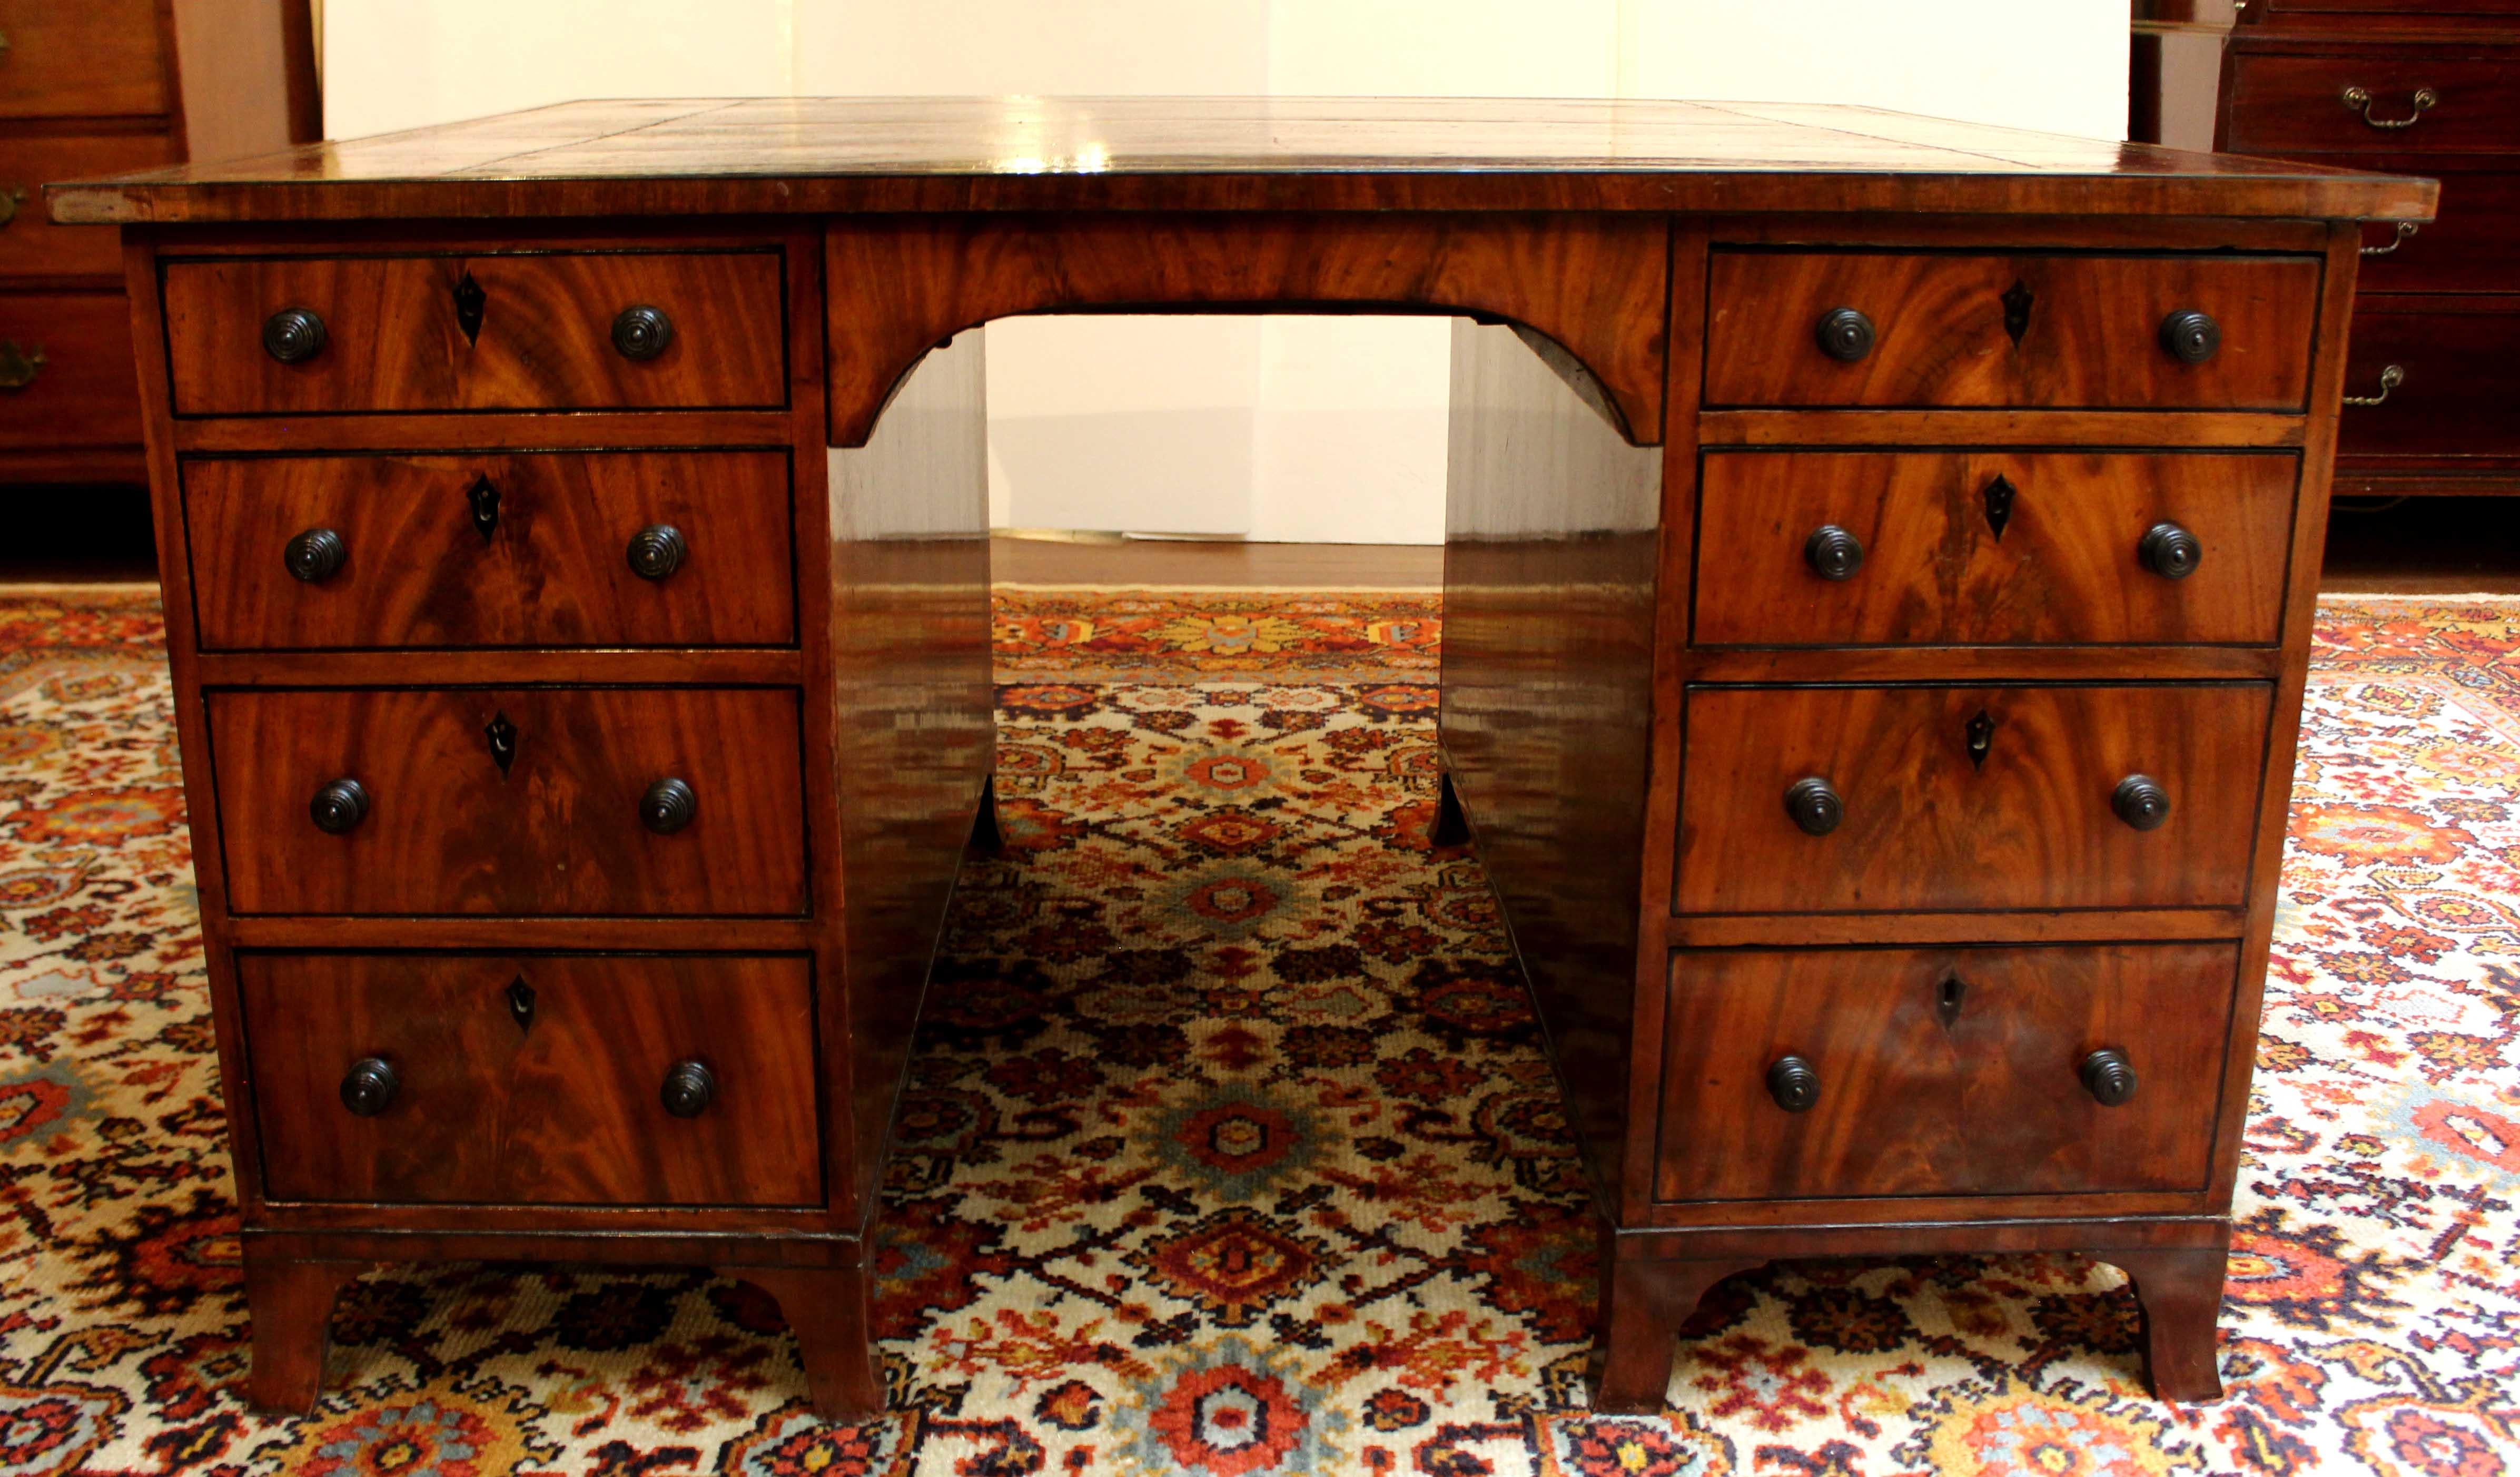 Circa 1830 partner's desk, English. Late George IV period. Mahogany with oak secondary wood. Nice selection of mahogany with the flame running all the up the drawers on one side and the cabinet doors on the other. Nicely accented in ebony for the